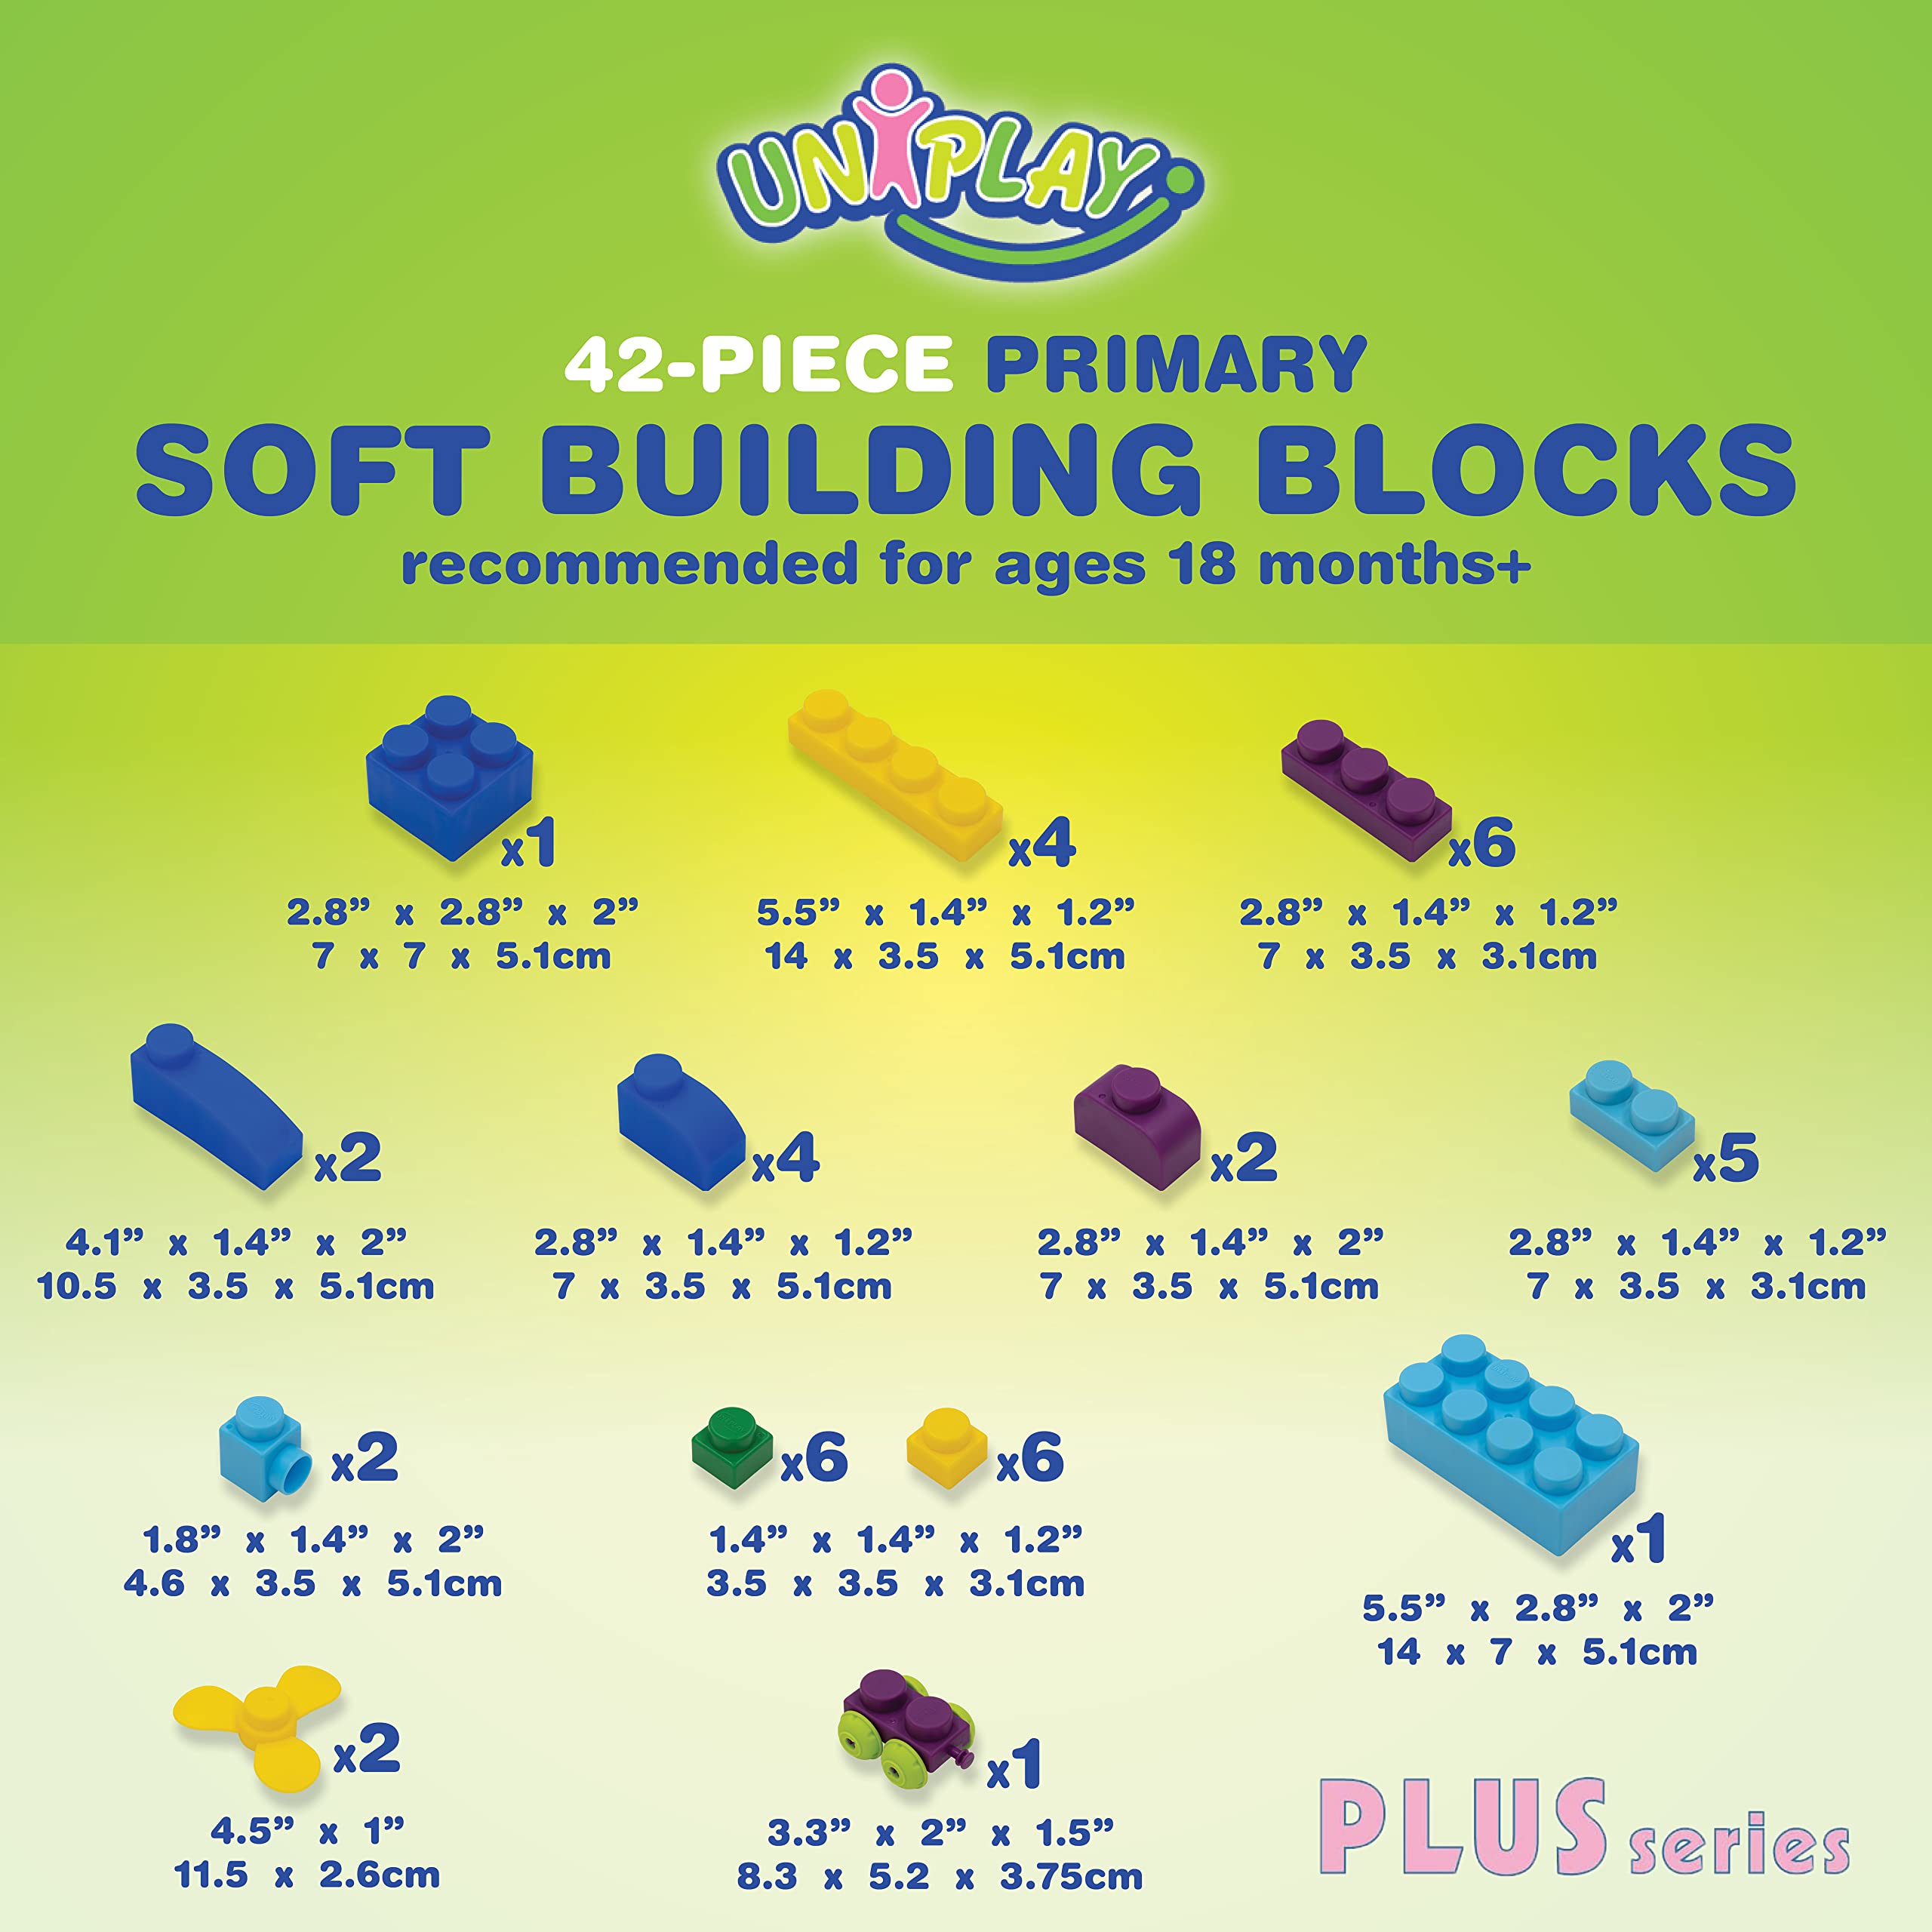 UNiPLAY Plus Soft Building Blocks — Creativity Toy, Educational Play, Cognitive Development, Early Learning Stacking Blocks for Infants and Toddlers, Primary (42-Piece Set)